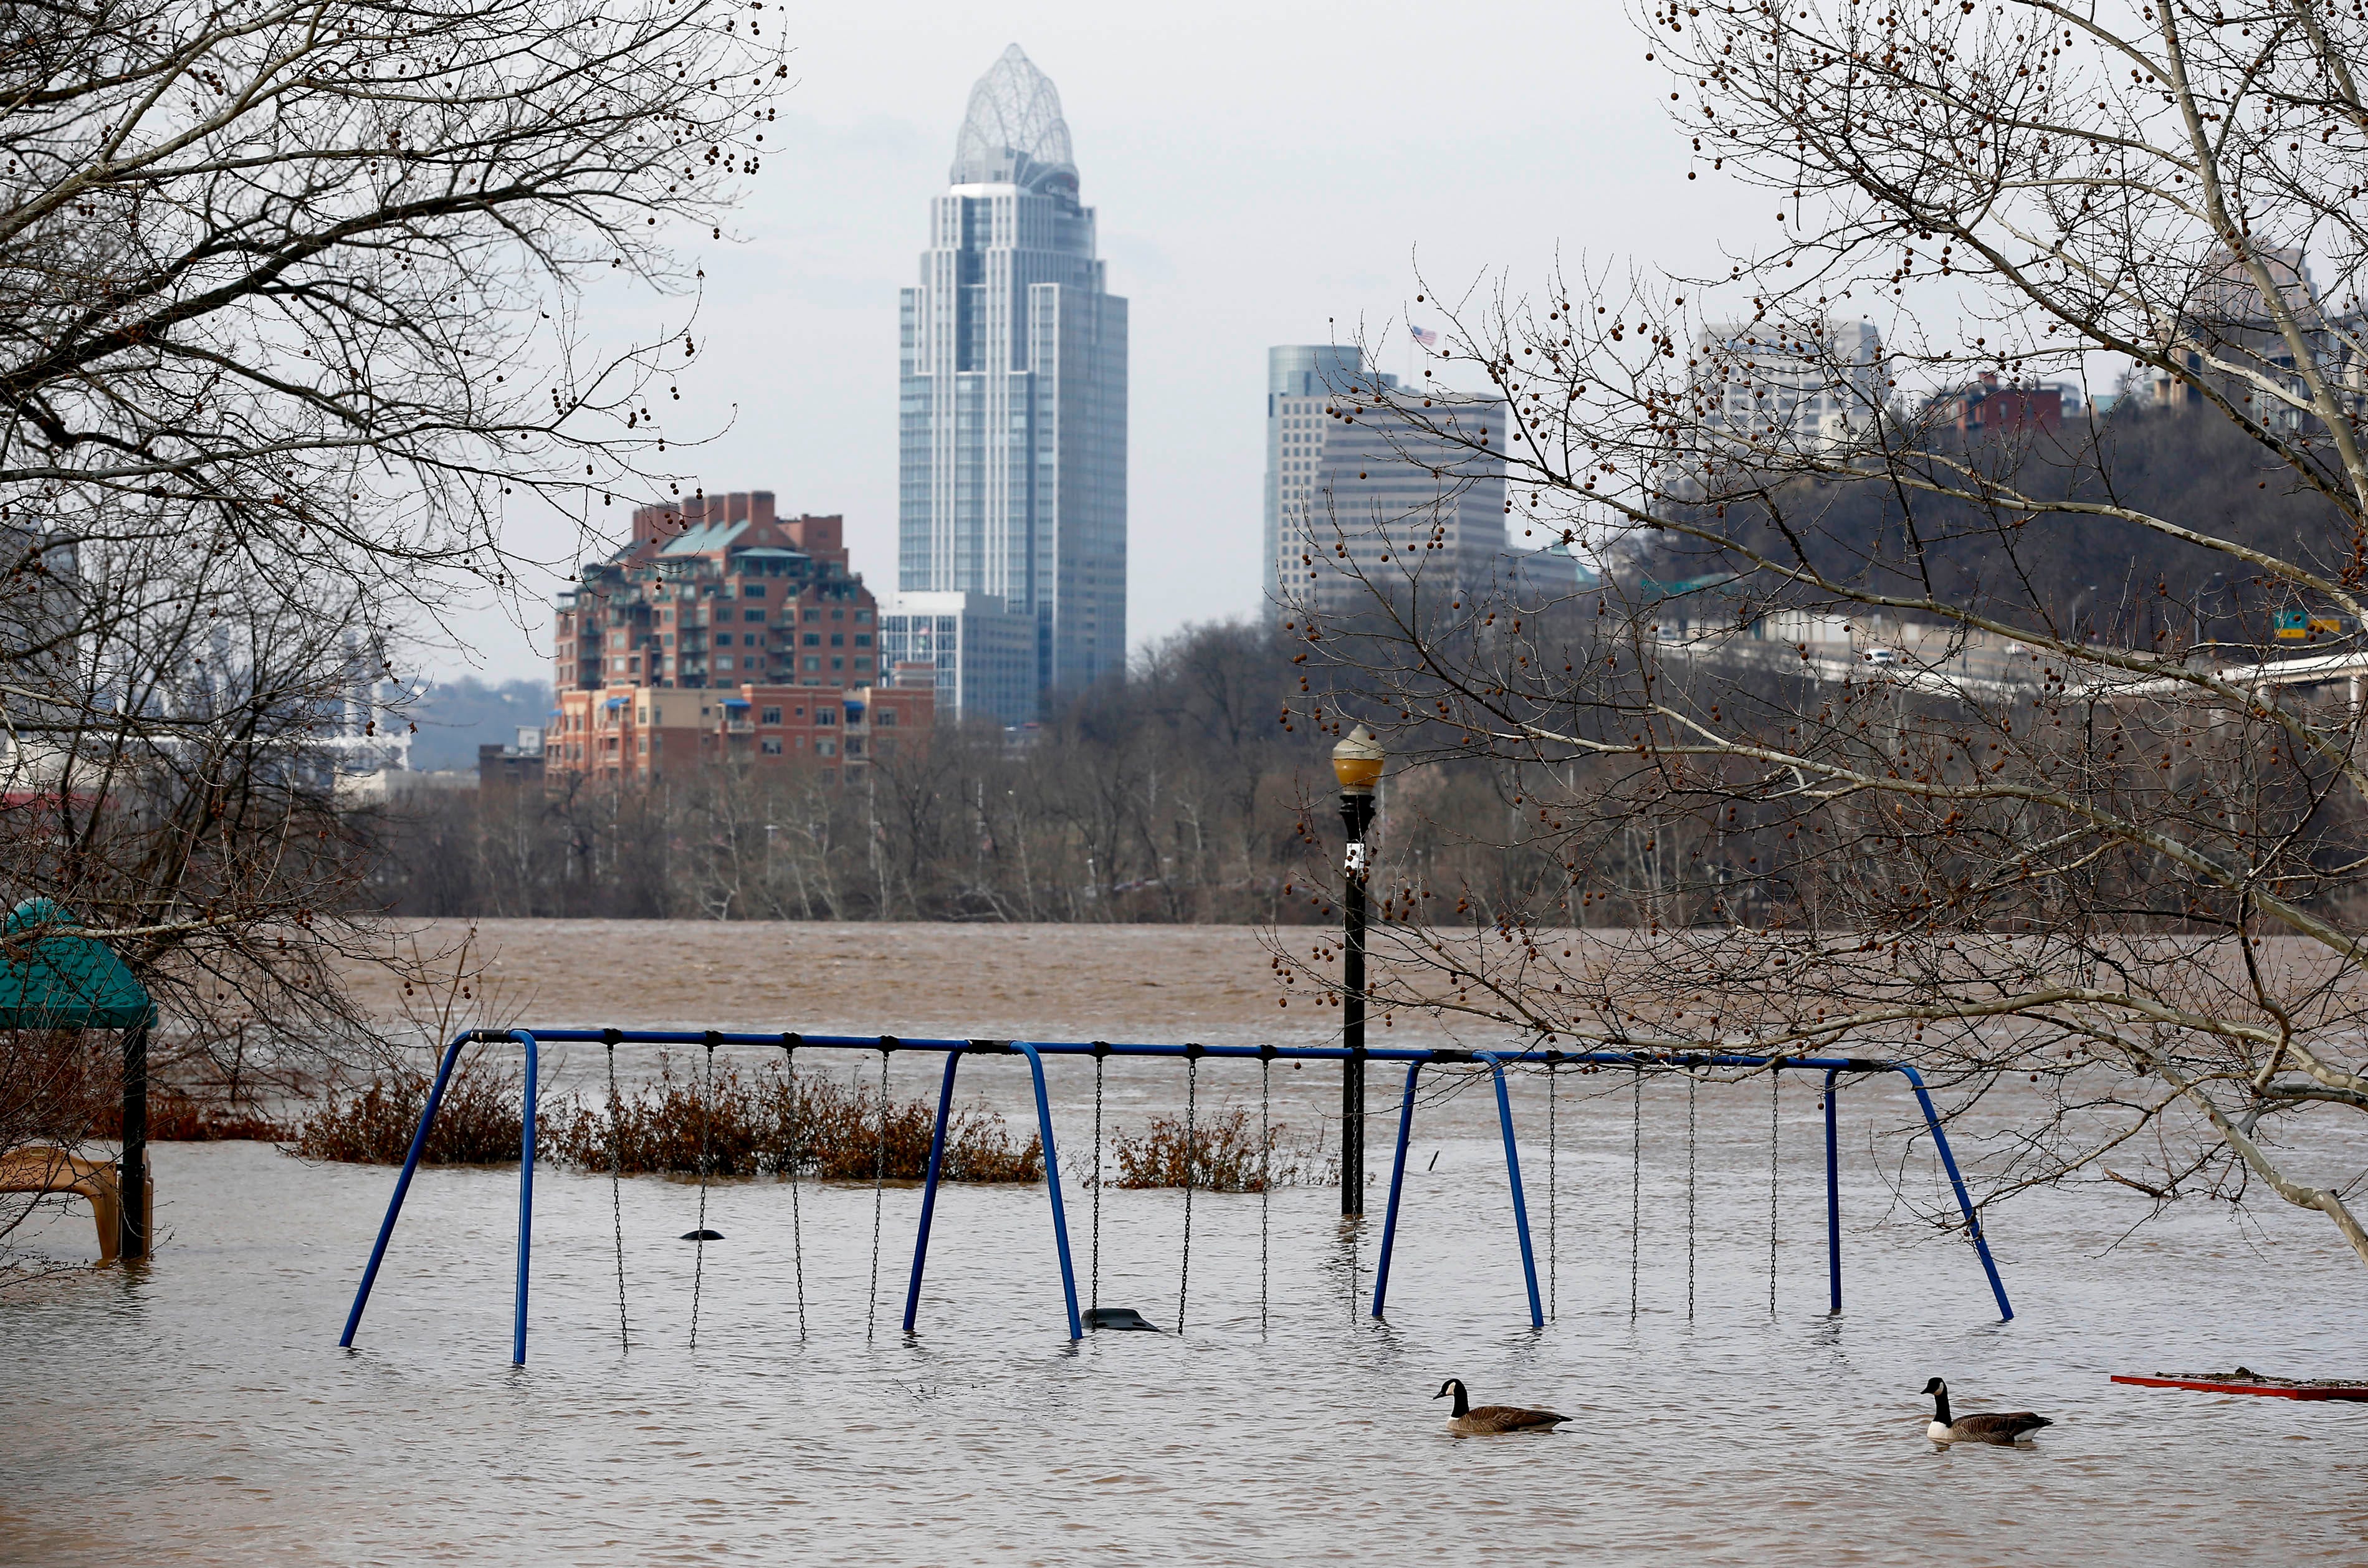 The playground at Bellevue Beach Park is surrounded by floodwaters from the Ohio River on  February 20, 2018 in Bellevue, KY.